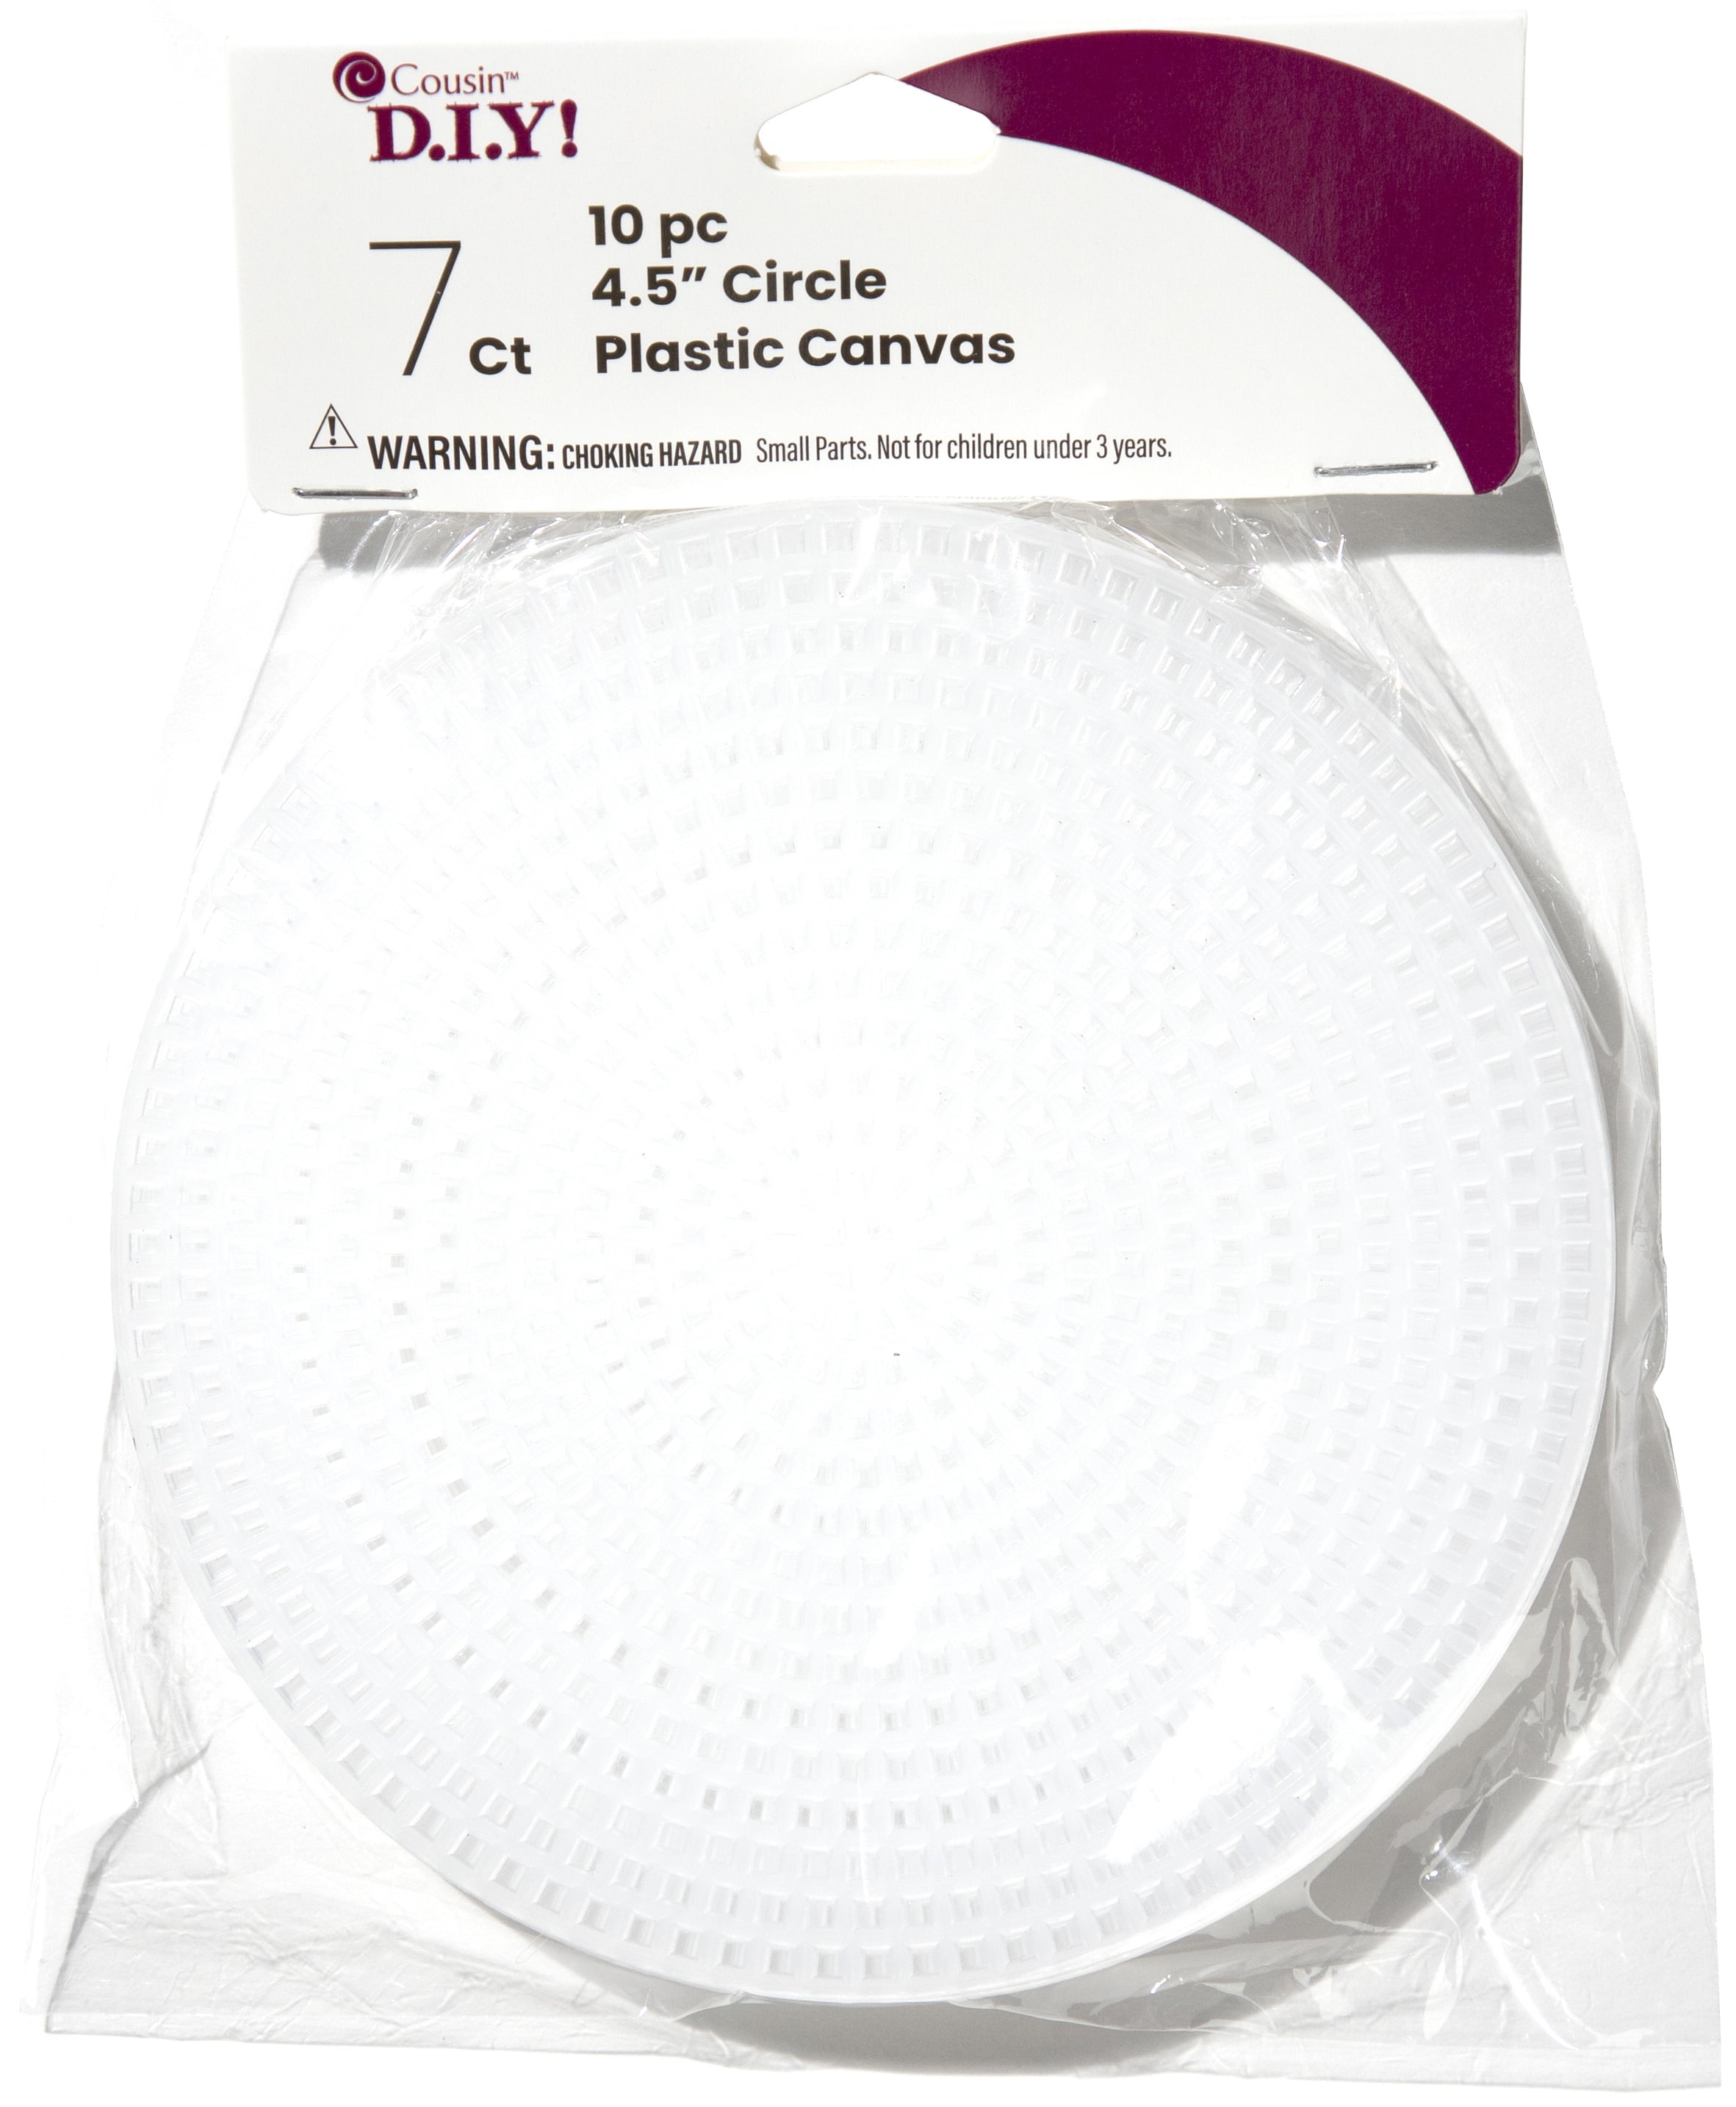 Crafting Plastic Canvas Shape Circle for Rug Hooking Yarn Crafting Projects 